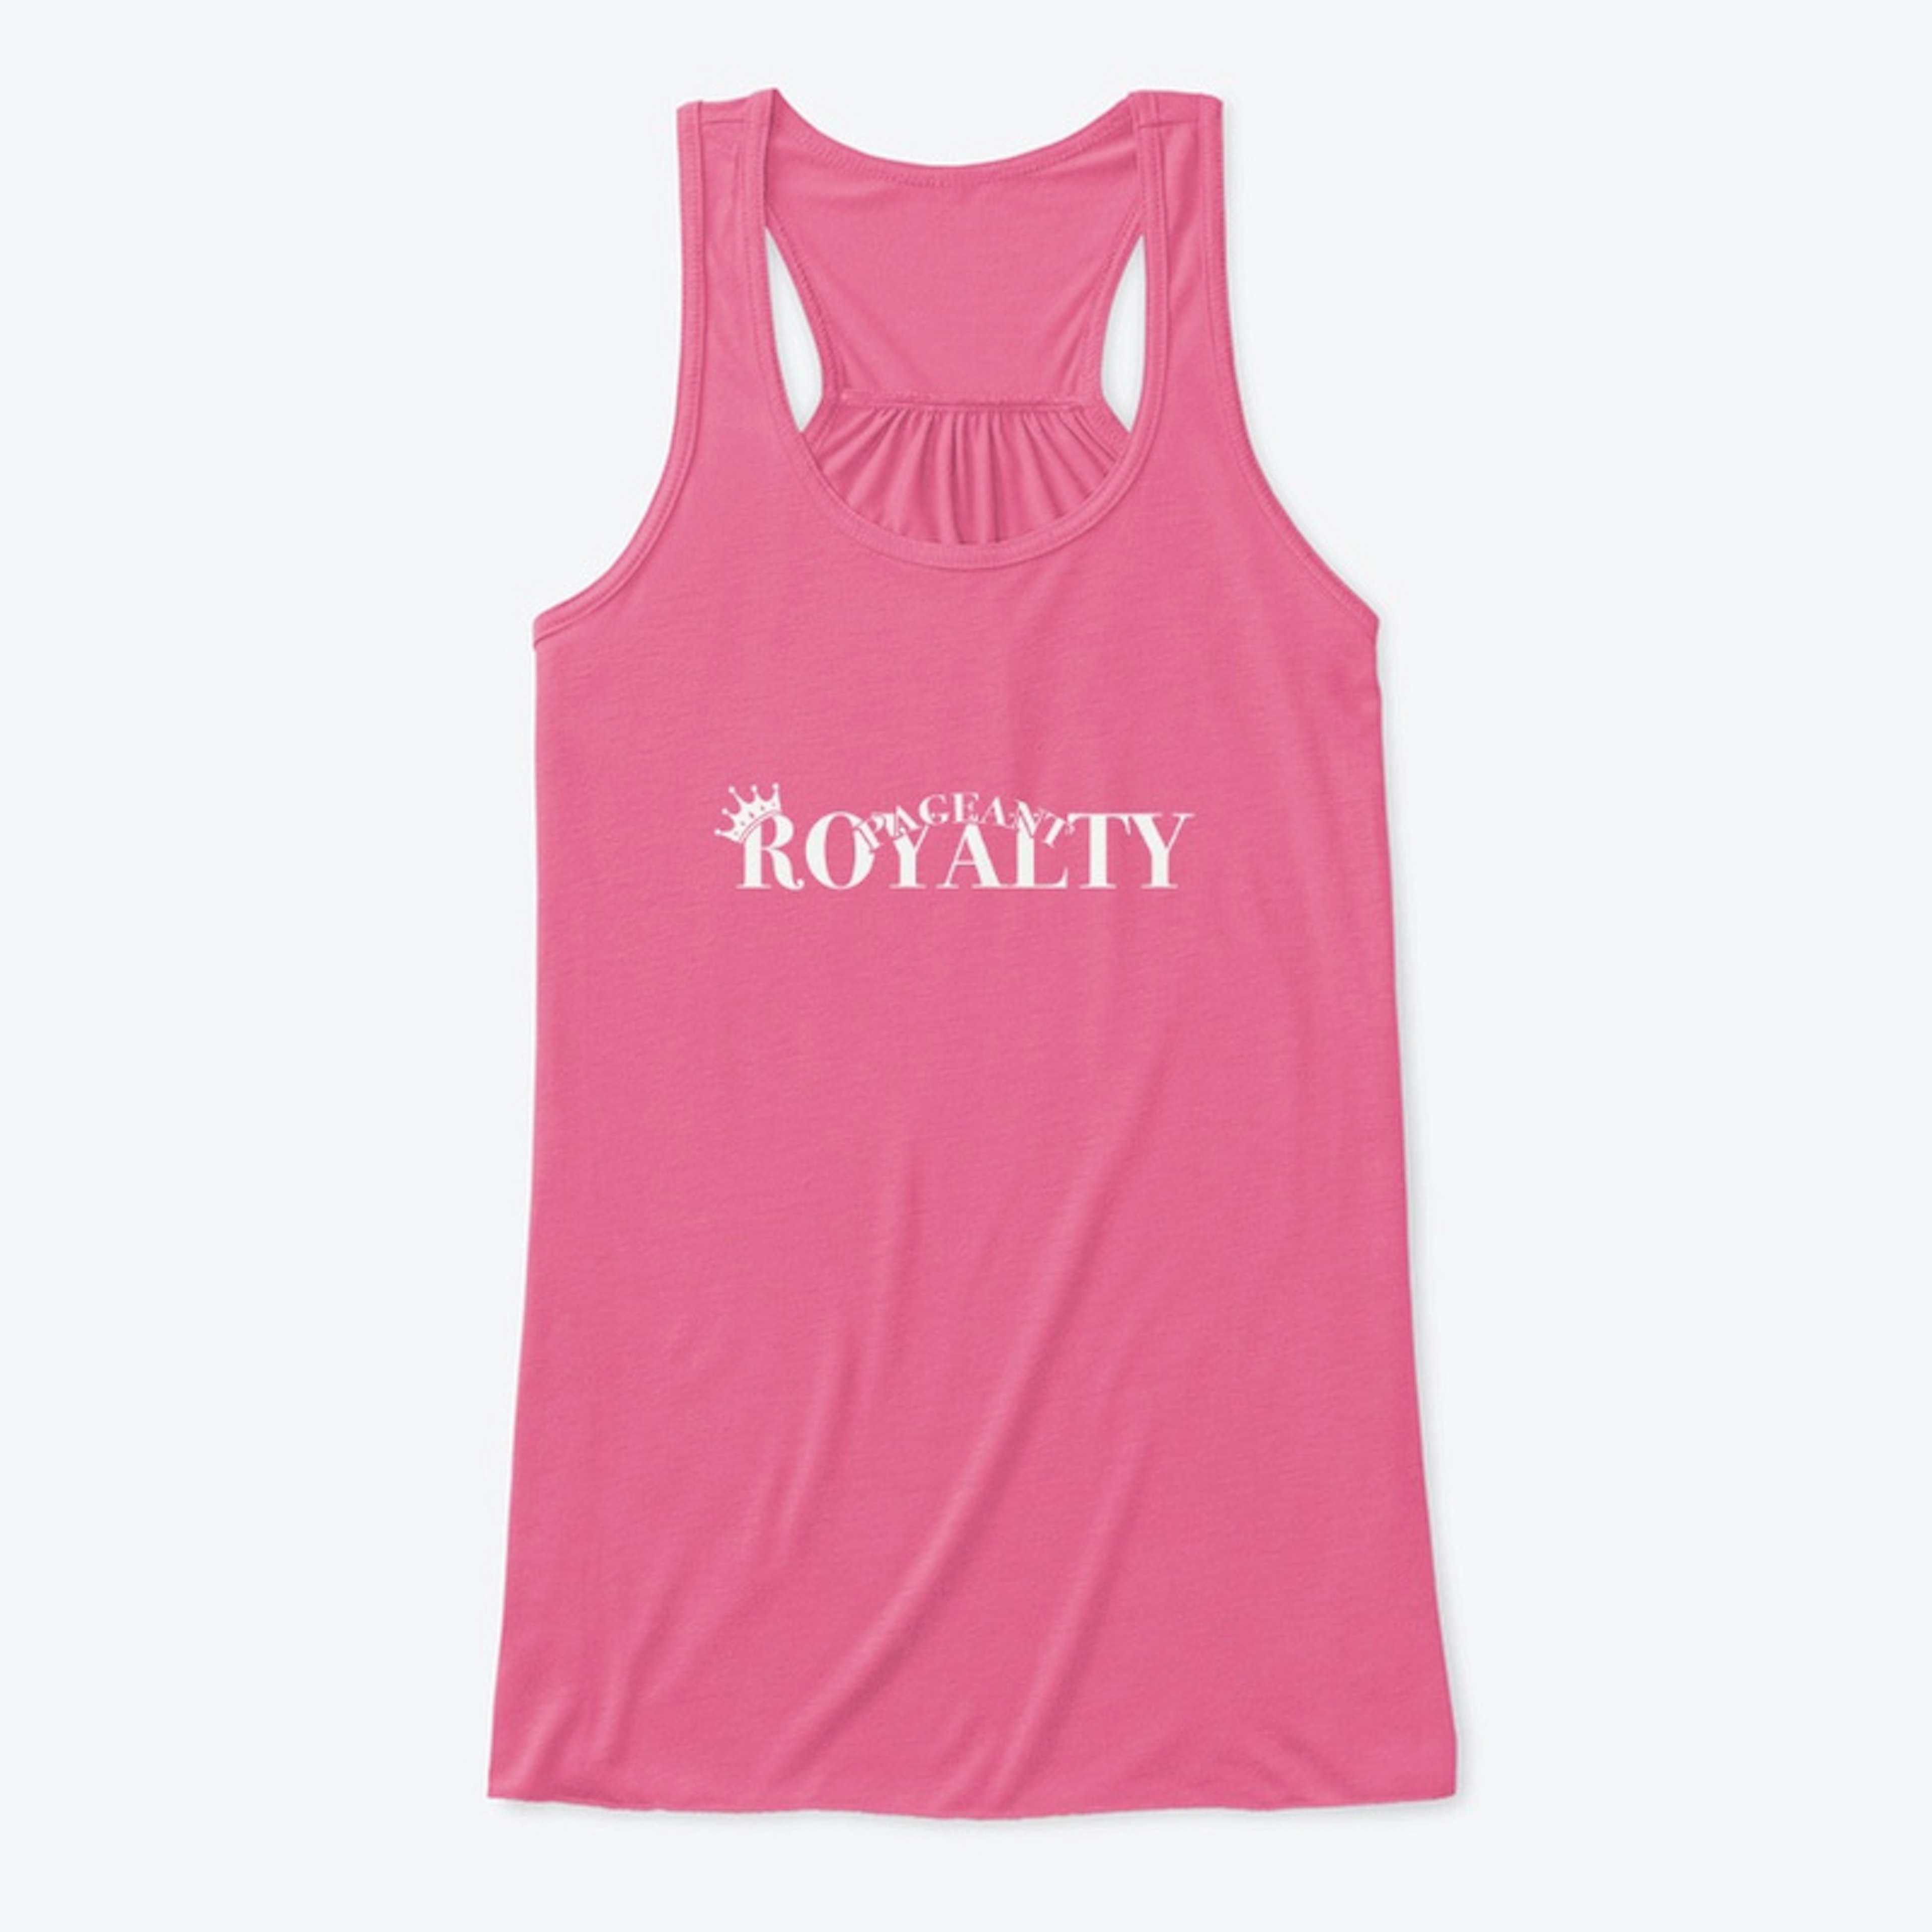 Pageant Royalty Tank Top white